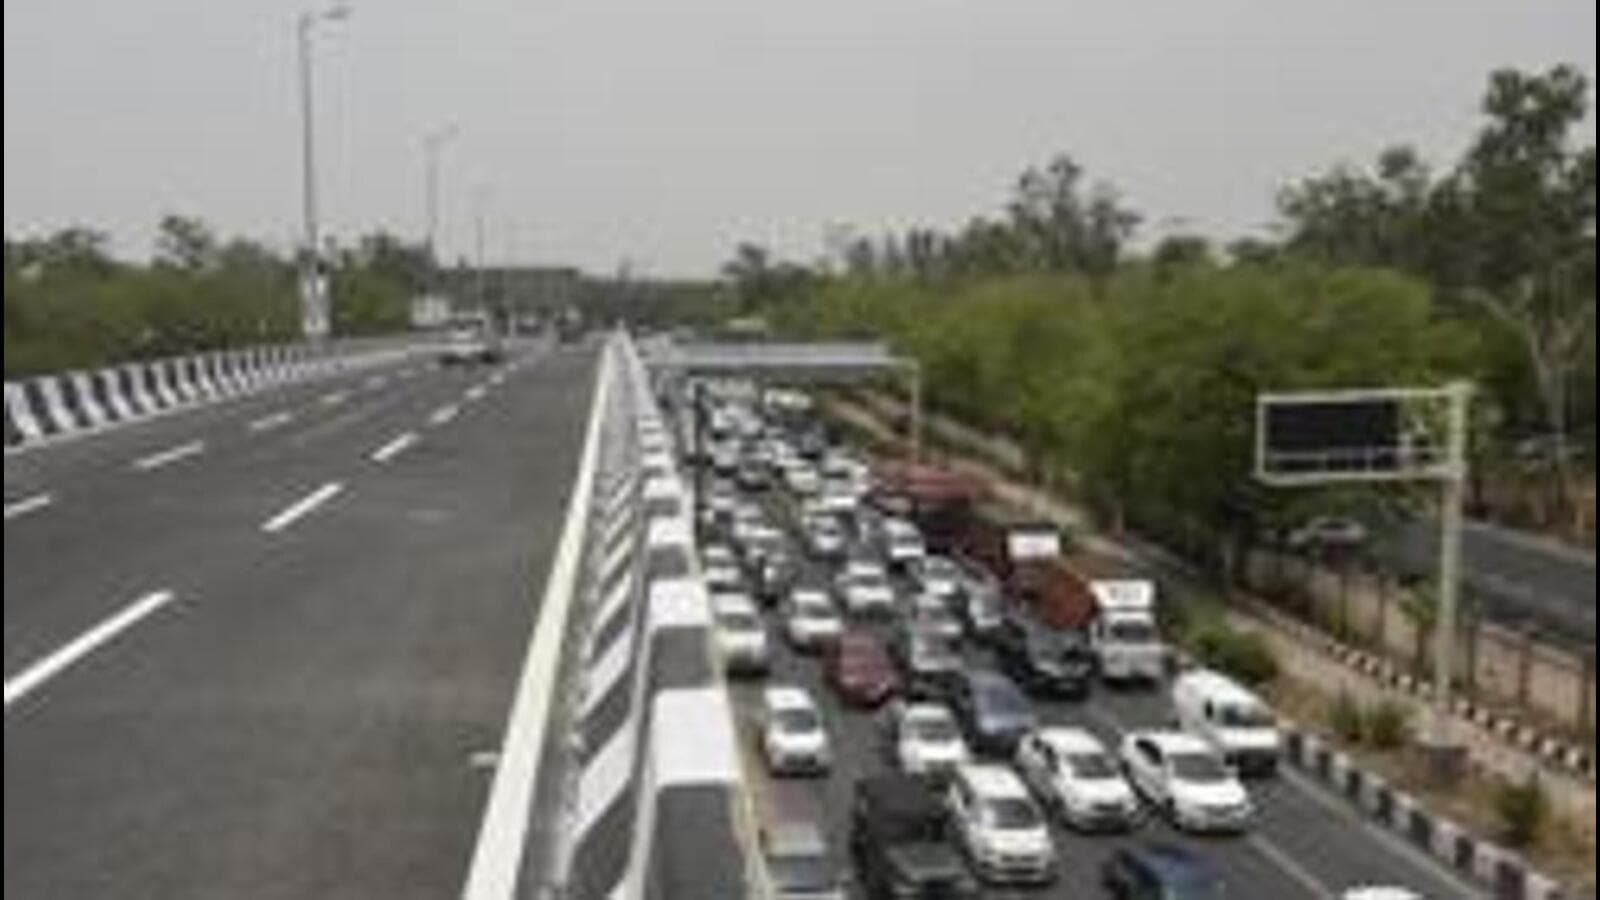 Pune's Ring Road Update: 17 Flyovers, 10 Stations - TimesProperty